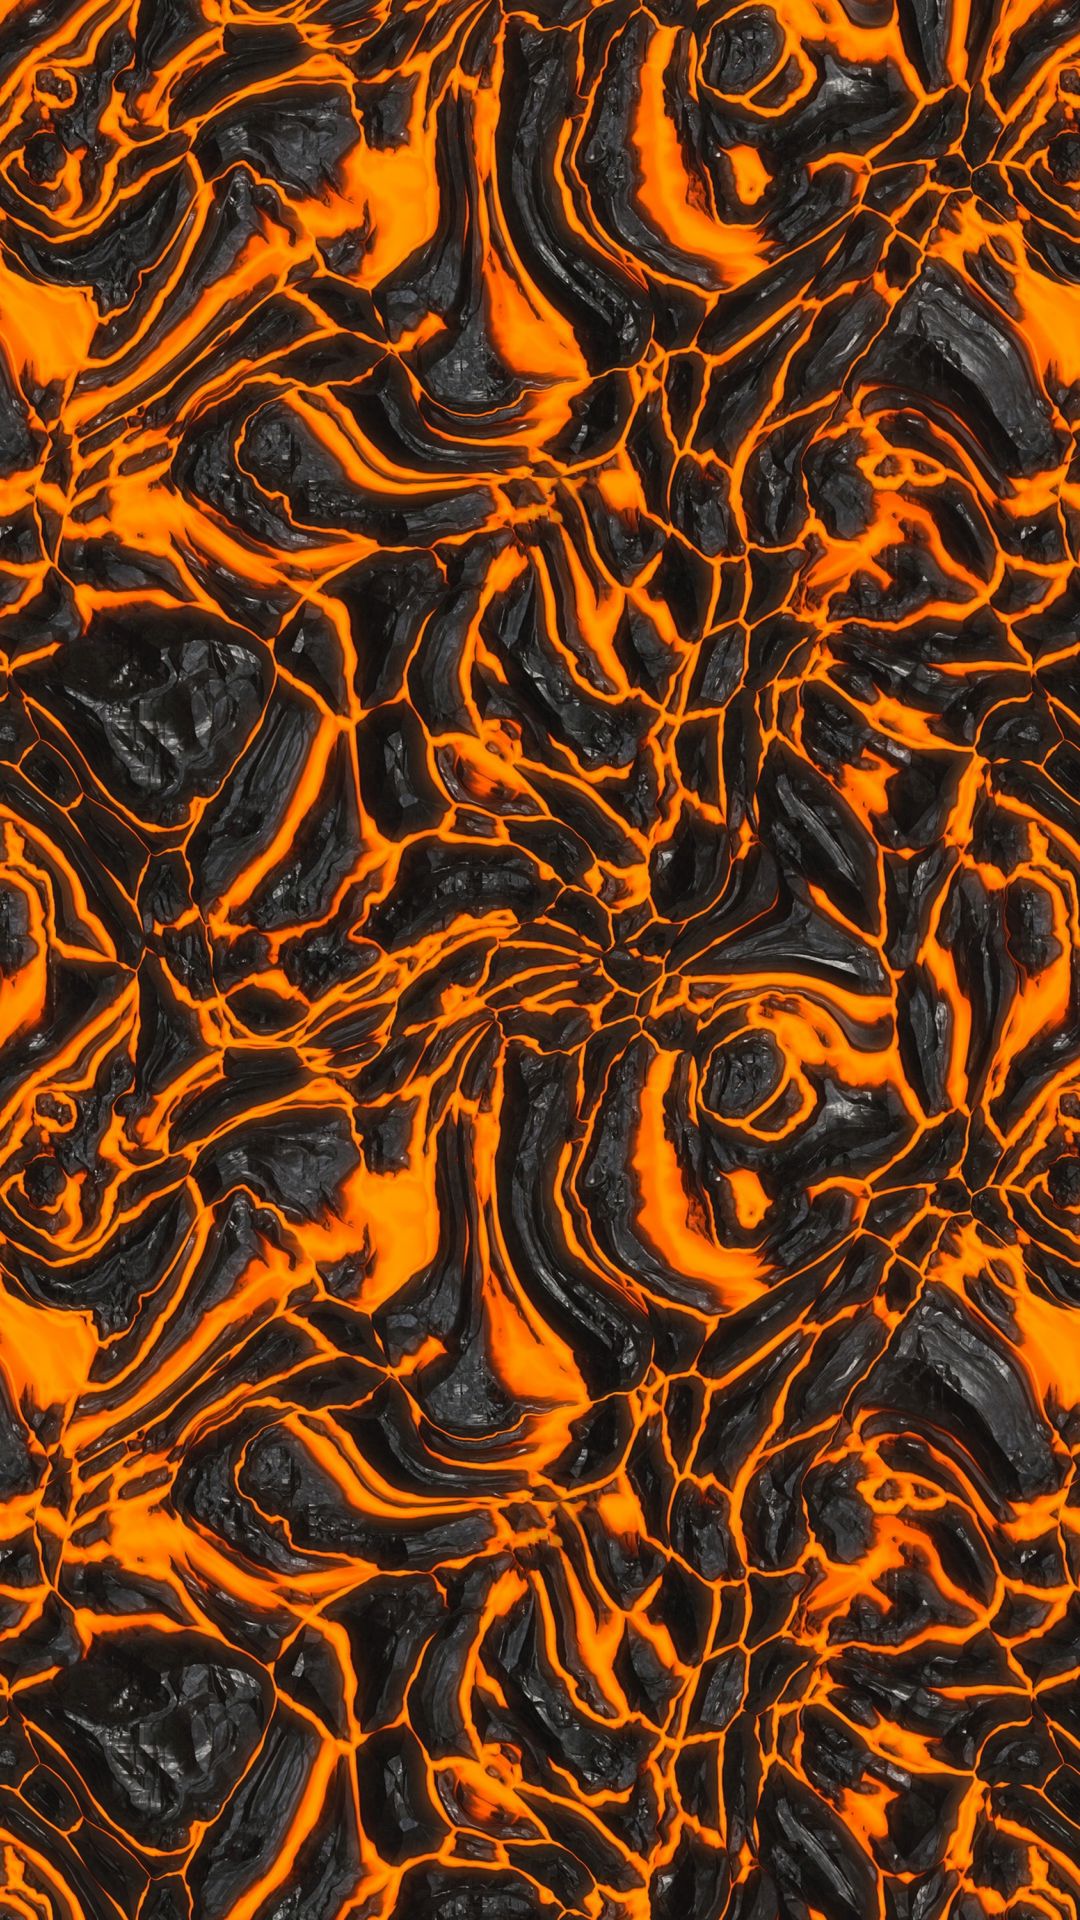 Download wallpaper 1080x1920 lava texture surface cranny fire hot  samsung galaxy s4 s5 note sony xperia z z1 z2 z3 htc one lenovo  vibe hd background